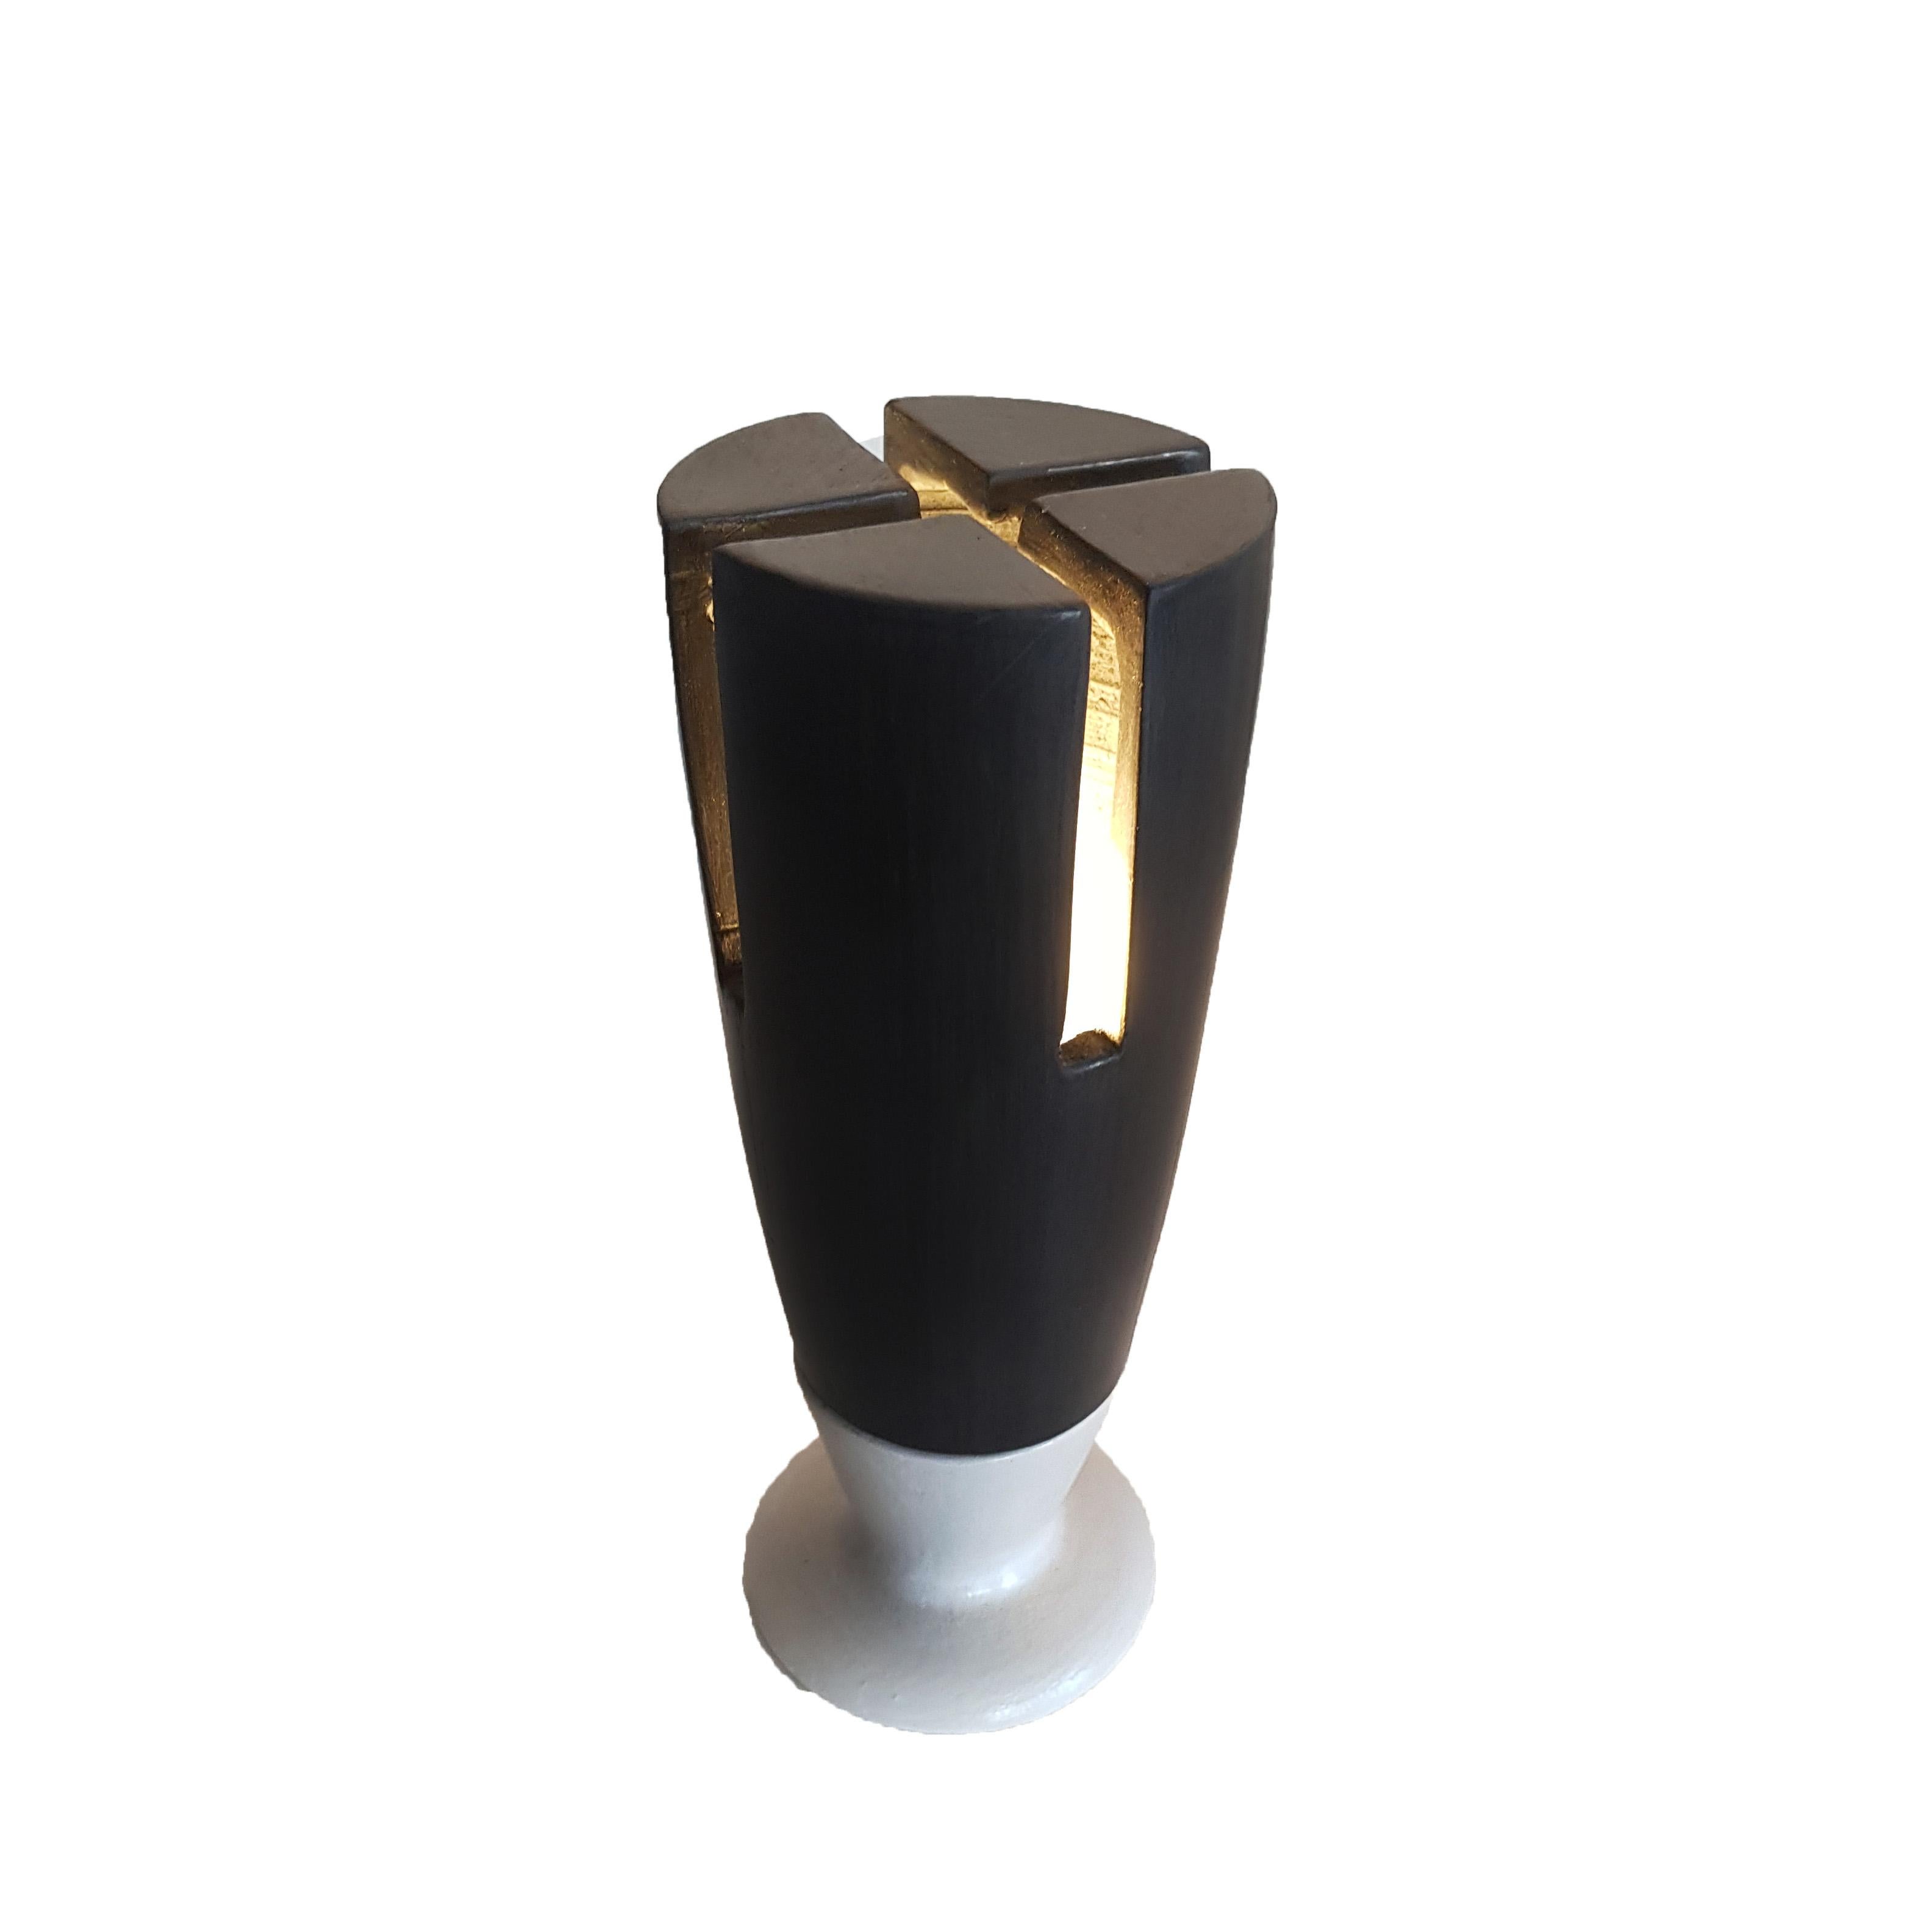 Table lamp made of bucchero and earthenware, which recalls medieval European architecture.
This item brings together minimalism and postmodernism.
The light radiating through the slits give this object a magical and timeless effect.
It is a